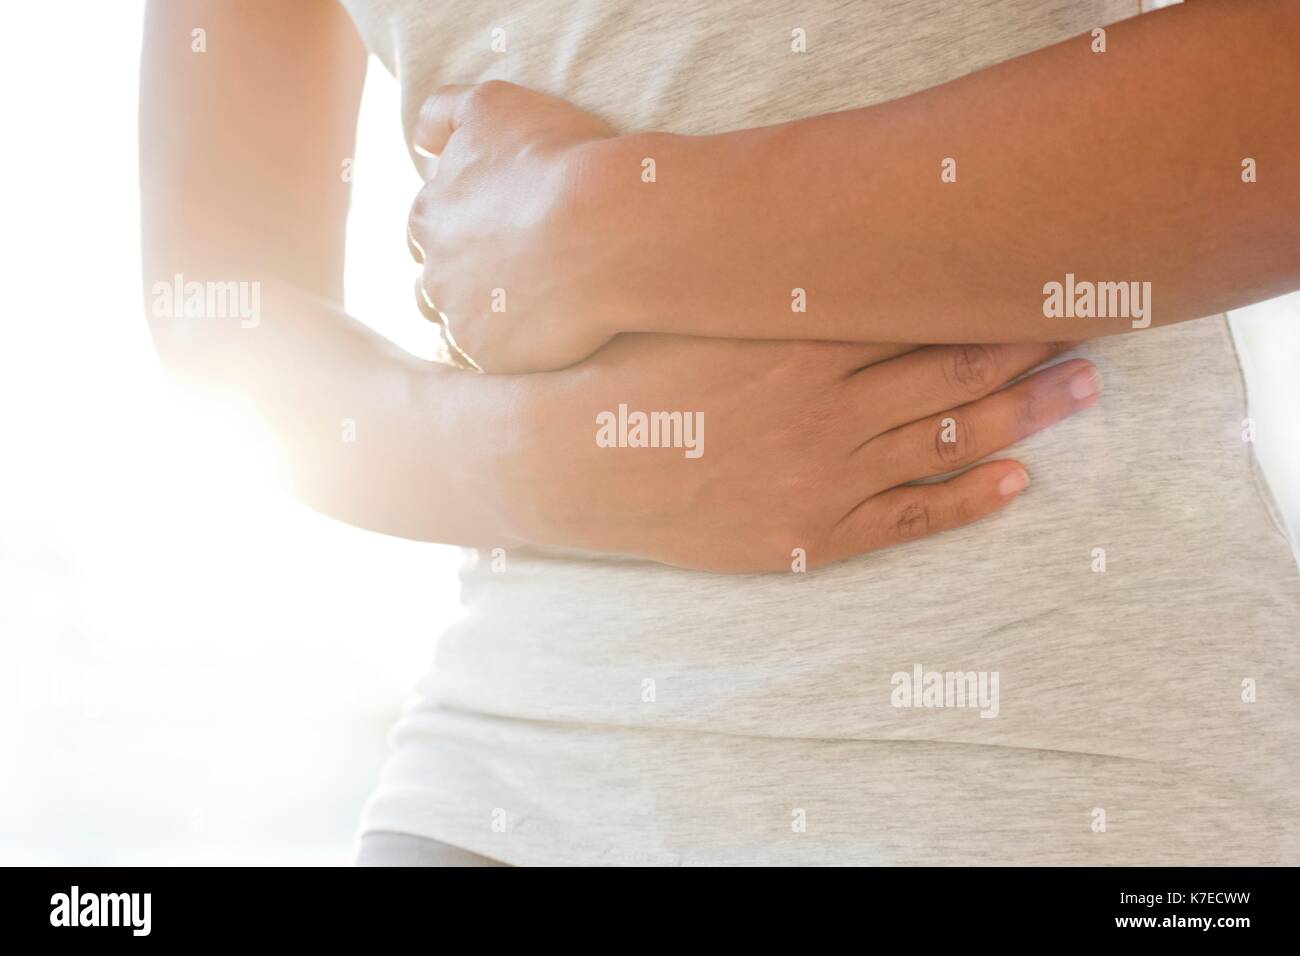 Mid adult woman holding stomach. Stock Photo